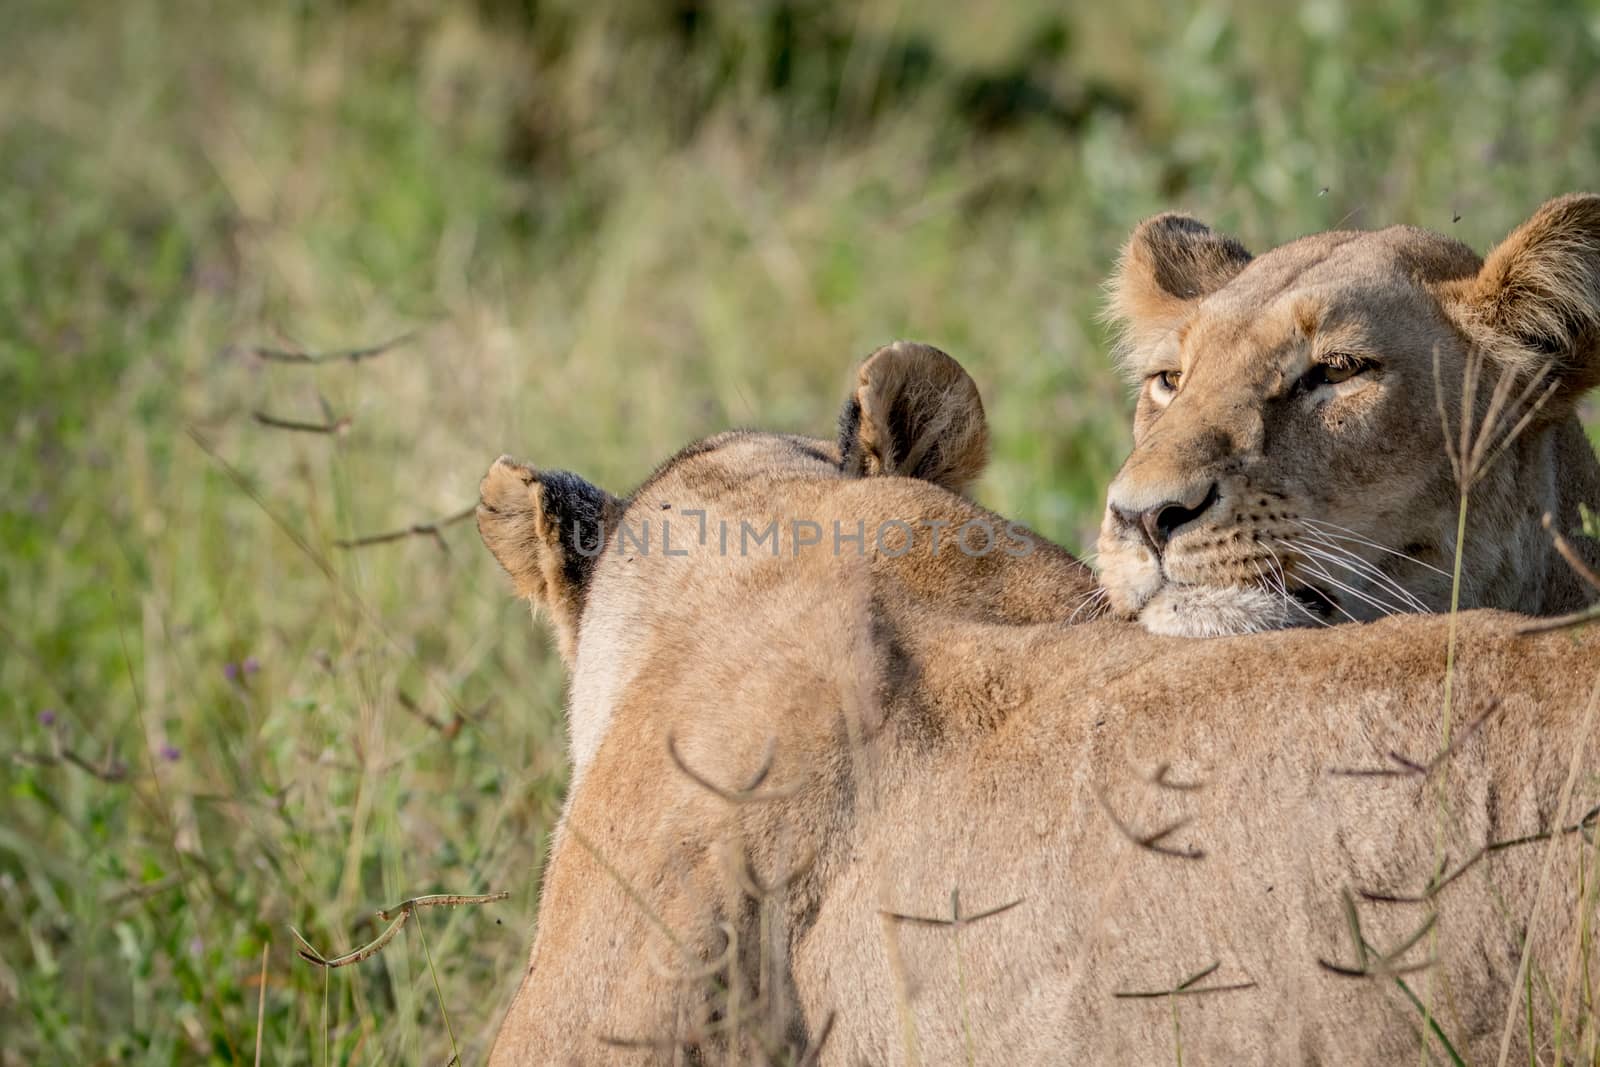 Two Lions bonding in the grass. by Simoneemanphotography